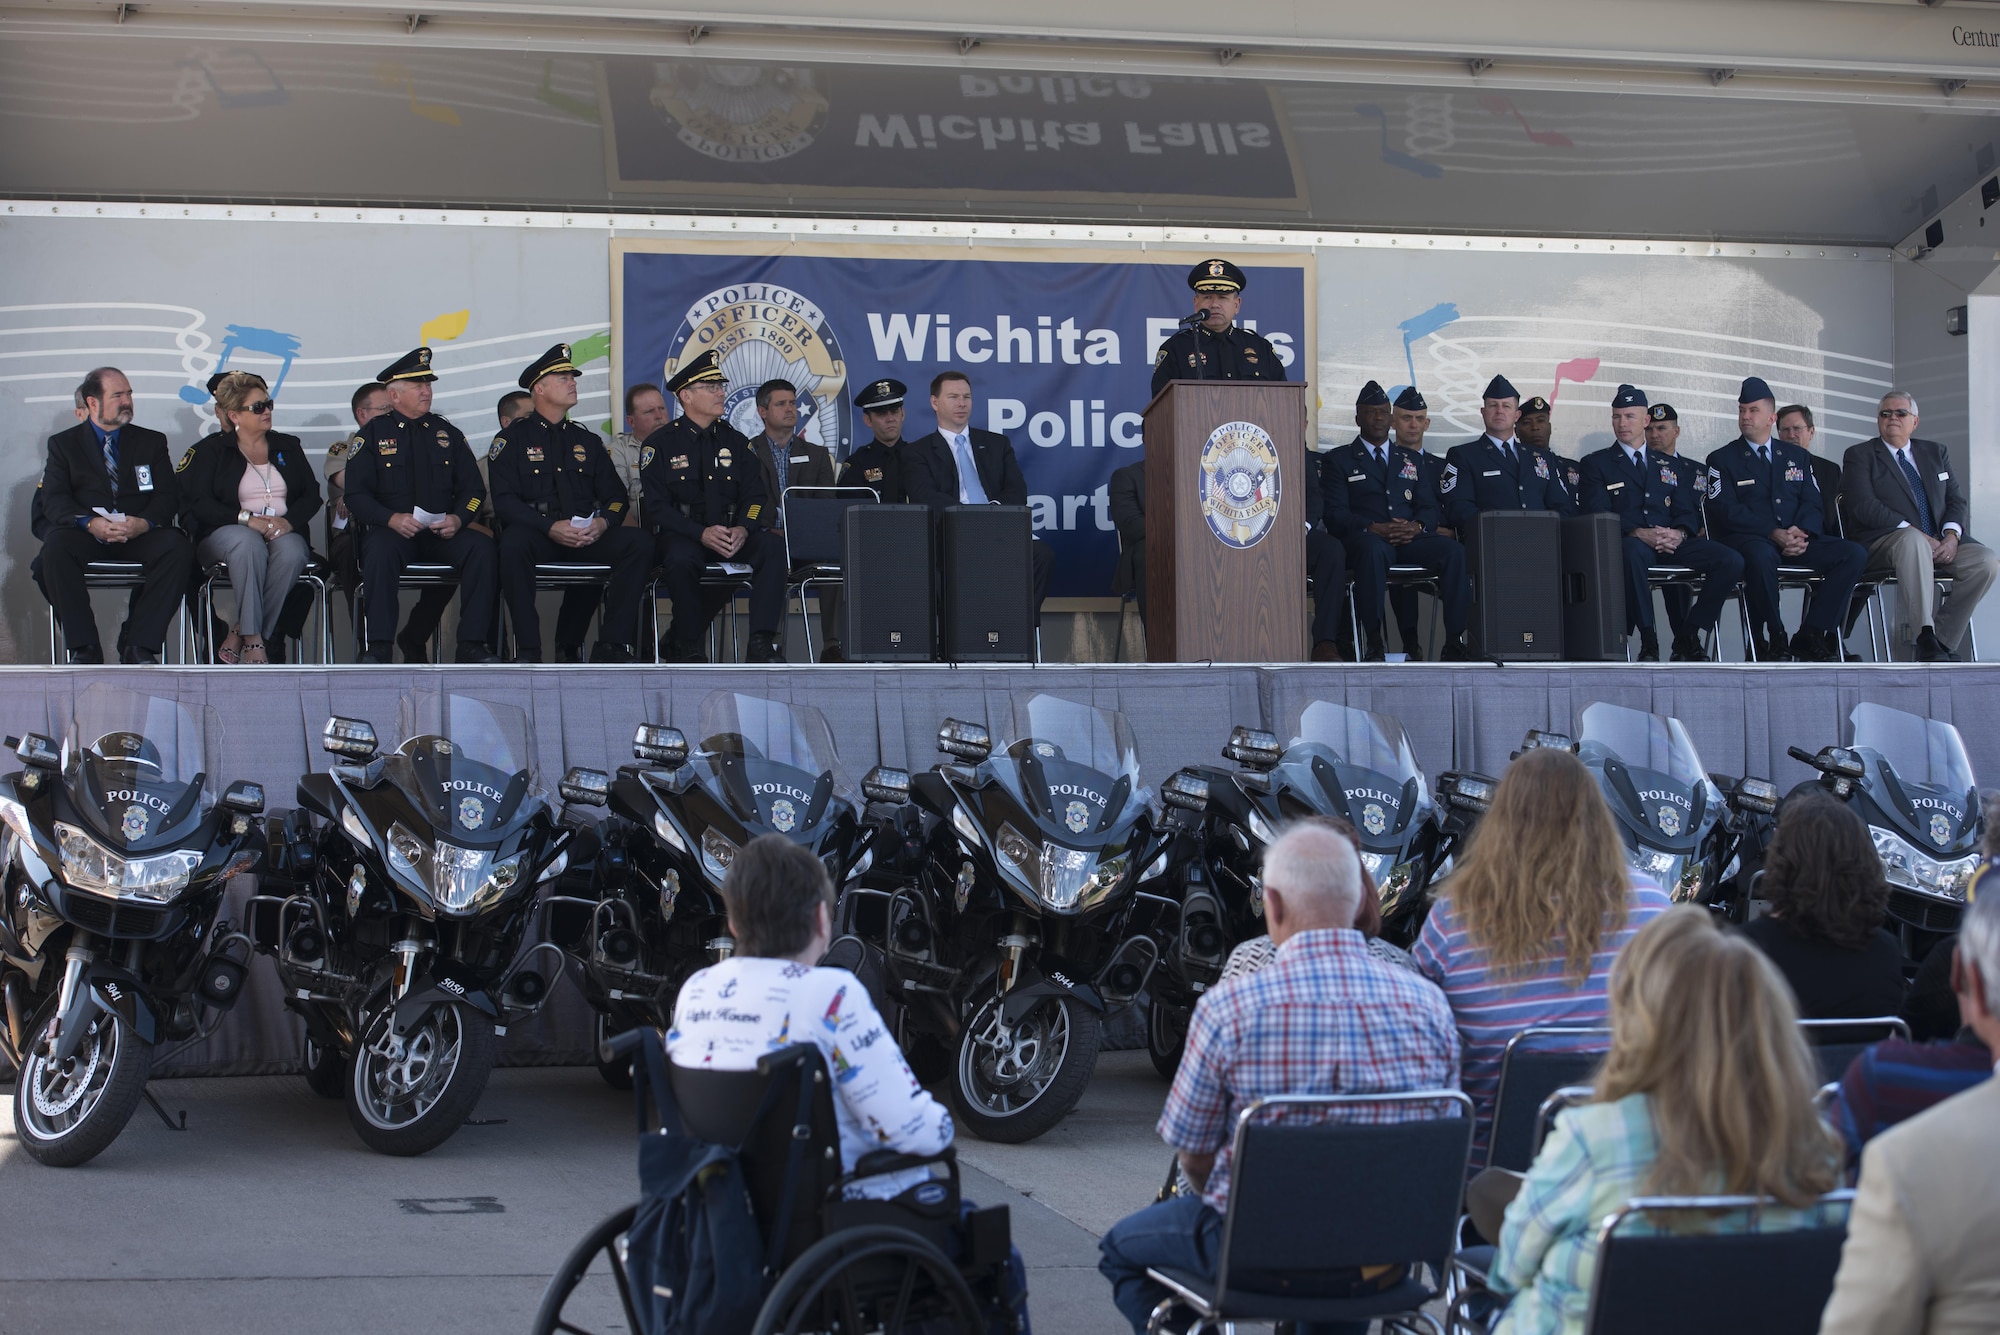 Wichita Falls, Texas, Chief of Police Manuel Borrego, provides closing remarks during the National Police Week proclamation ceremony, May 15, 2017. National Police Week honors both current and former law enforcement officers as well as officers who’ve paid the ultimate sacrifice. (U.S. Air Force photo by Staff Sgt. Kyle E. Gese)